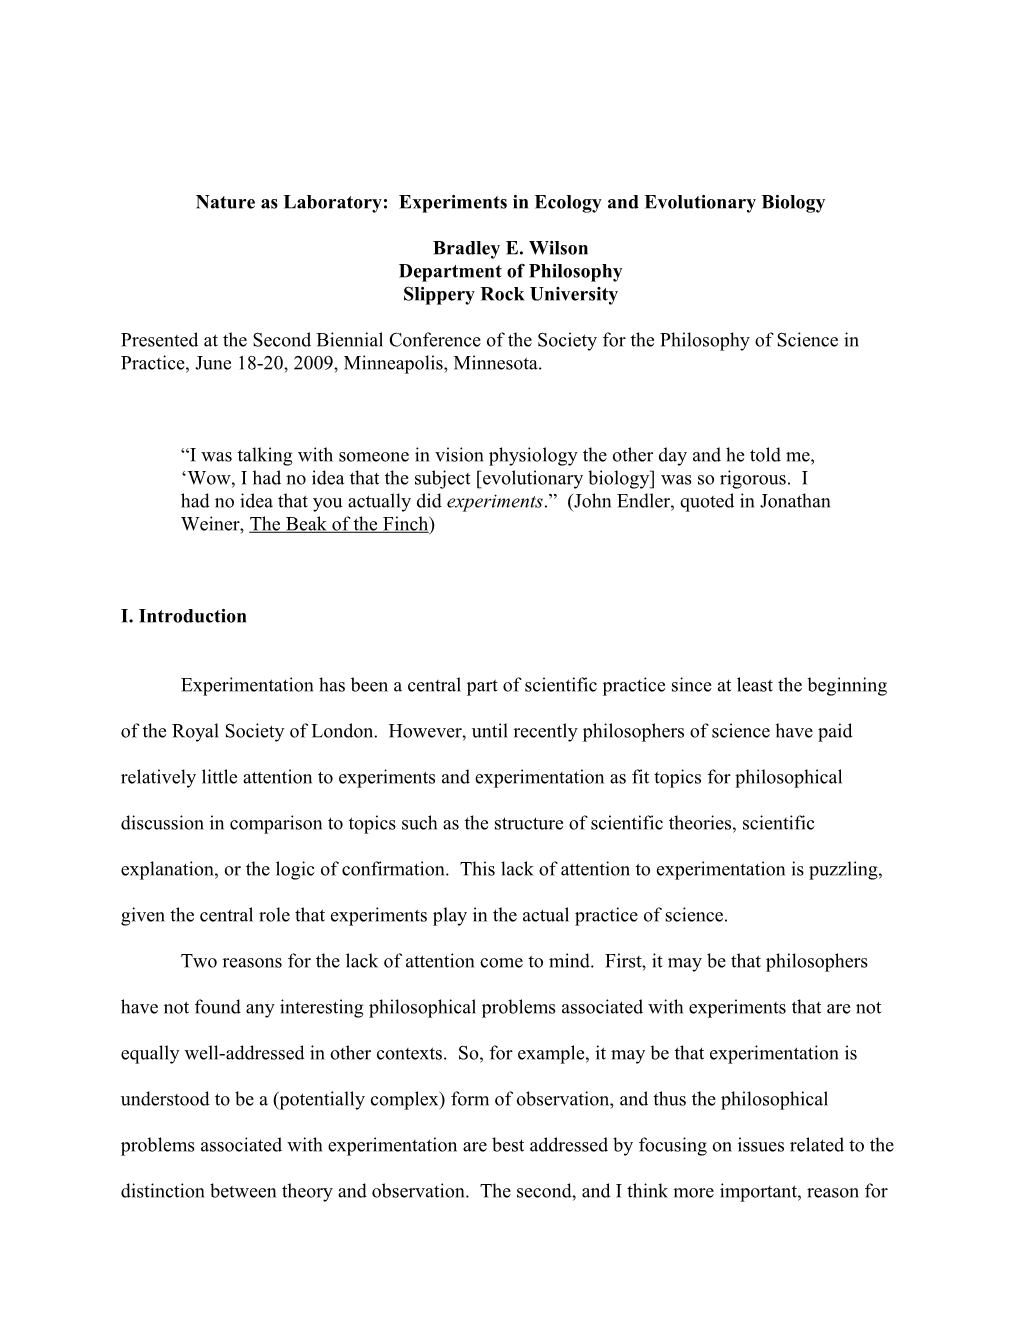 Nature As Laboratory: Experiments in Ecology and Evolutionary Biology